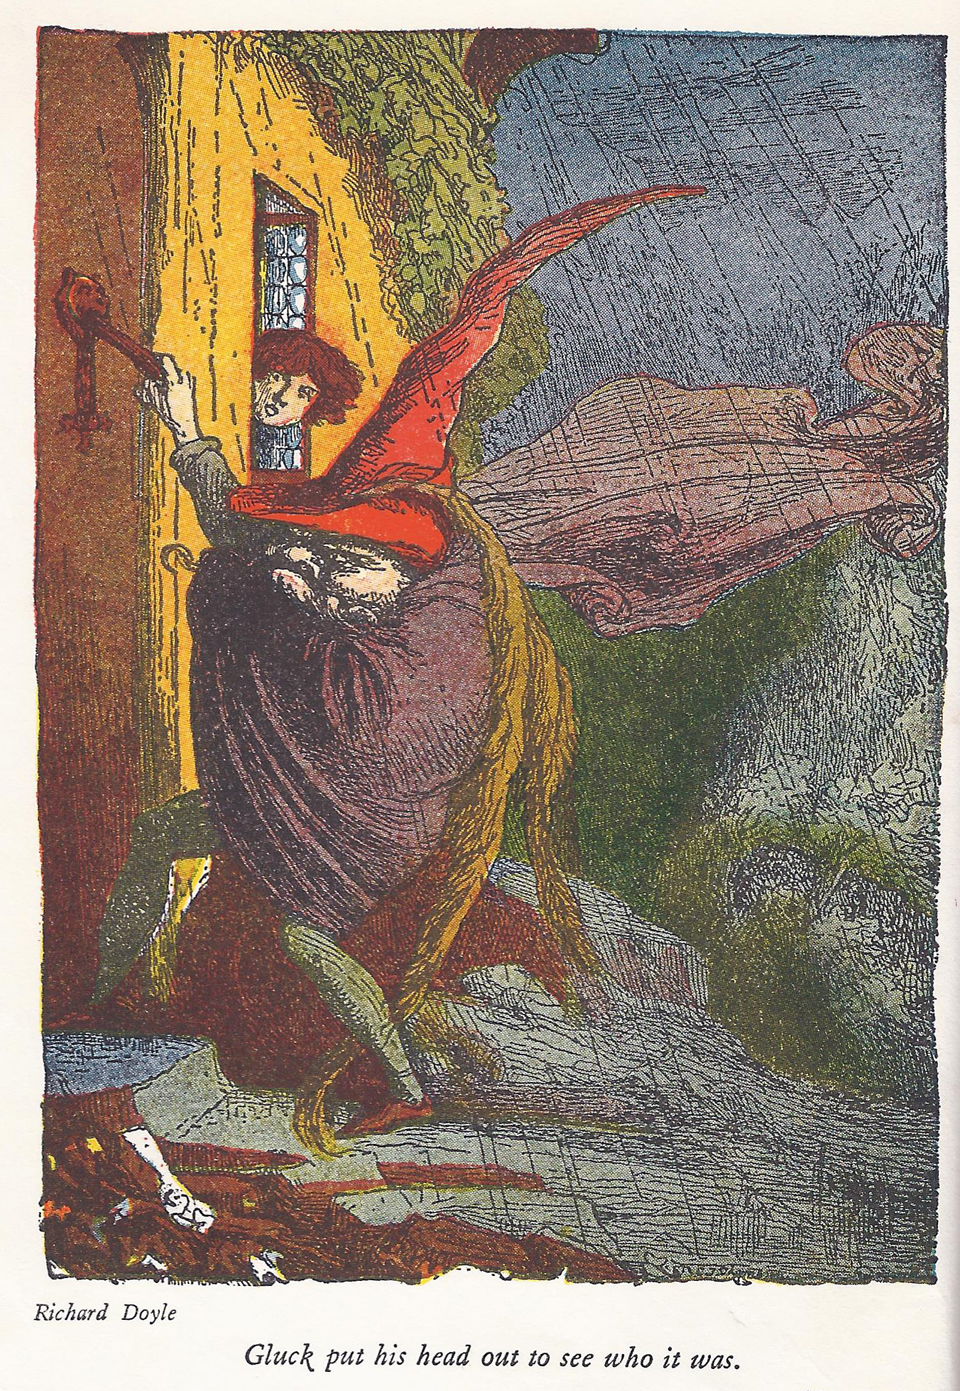 Richard Doyle - Color interior art from "The King of the Golden River" by John Ruskin, 1885